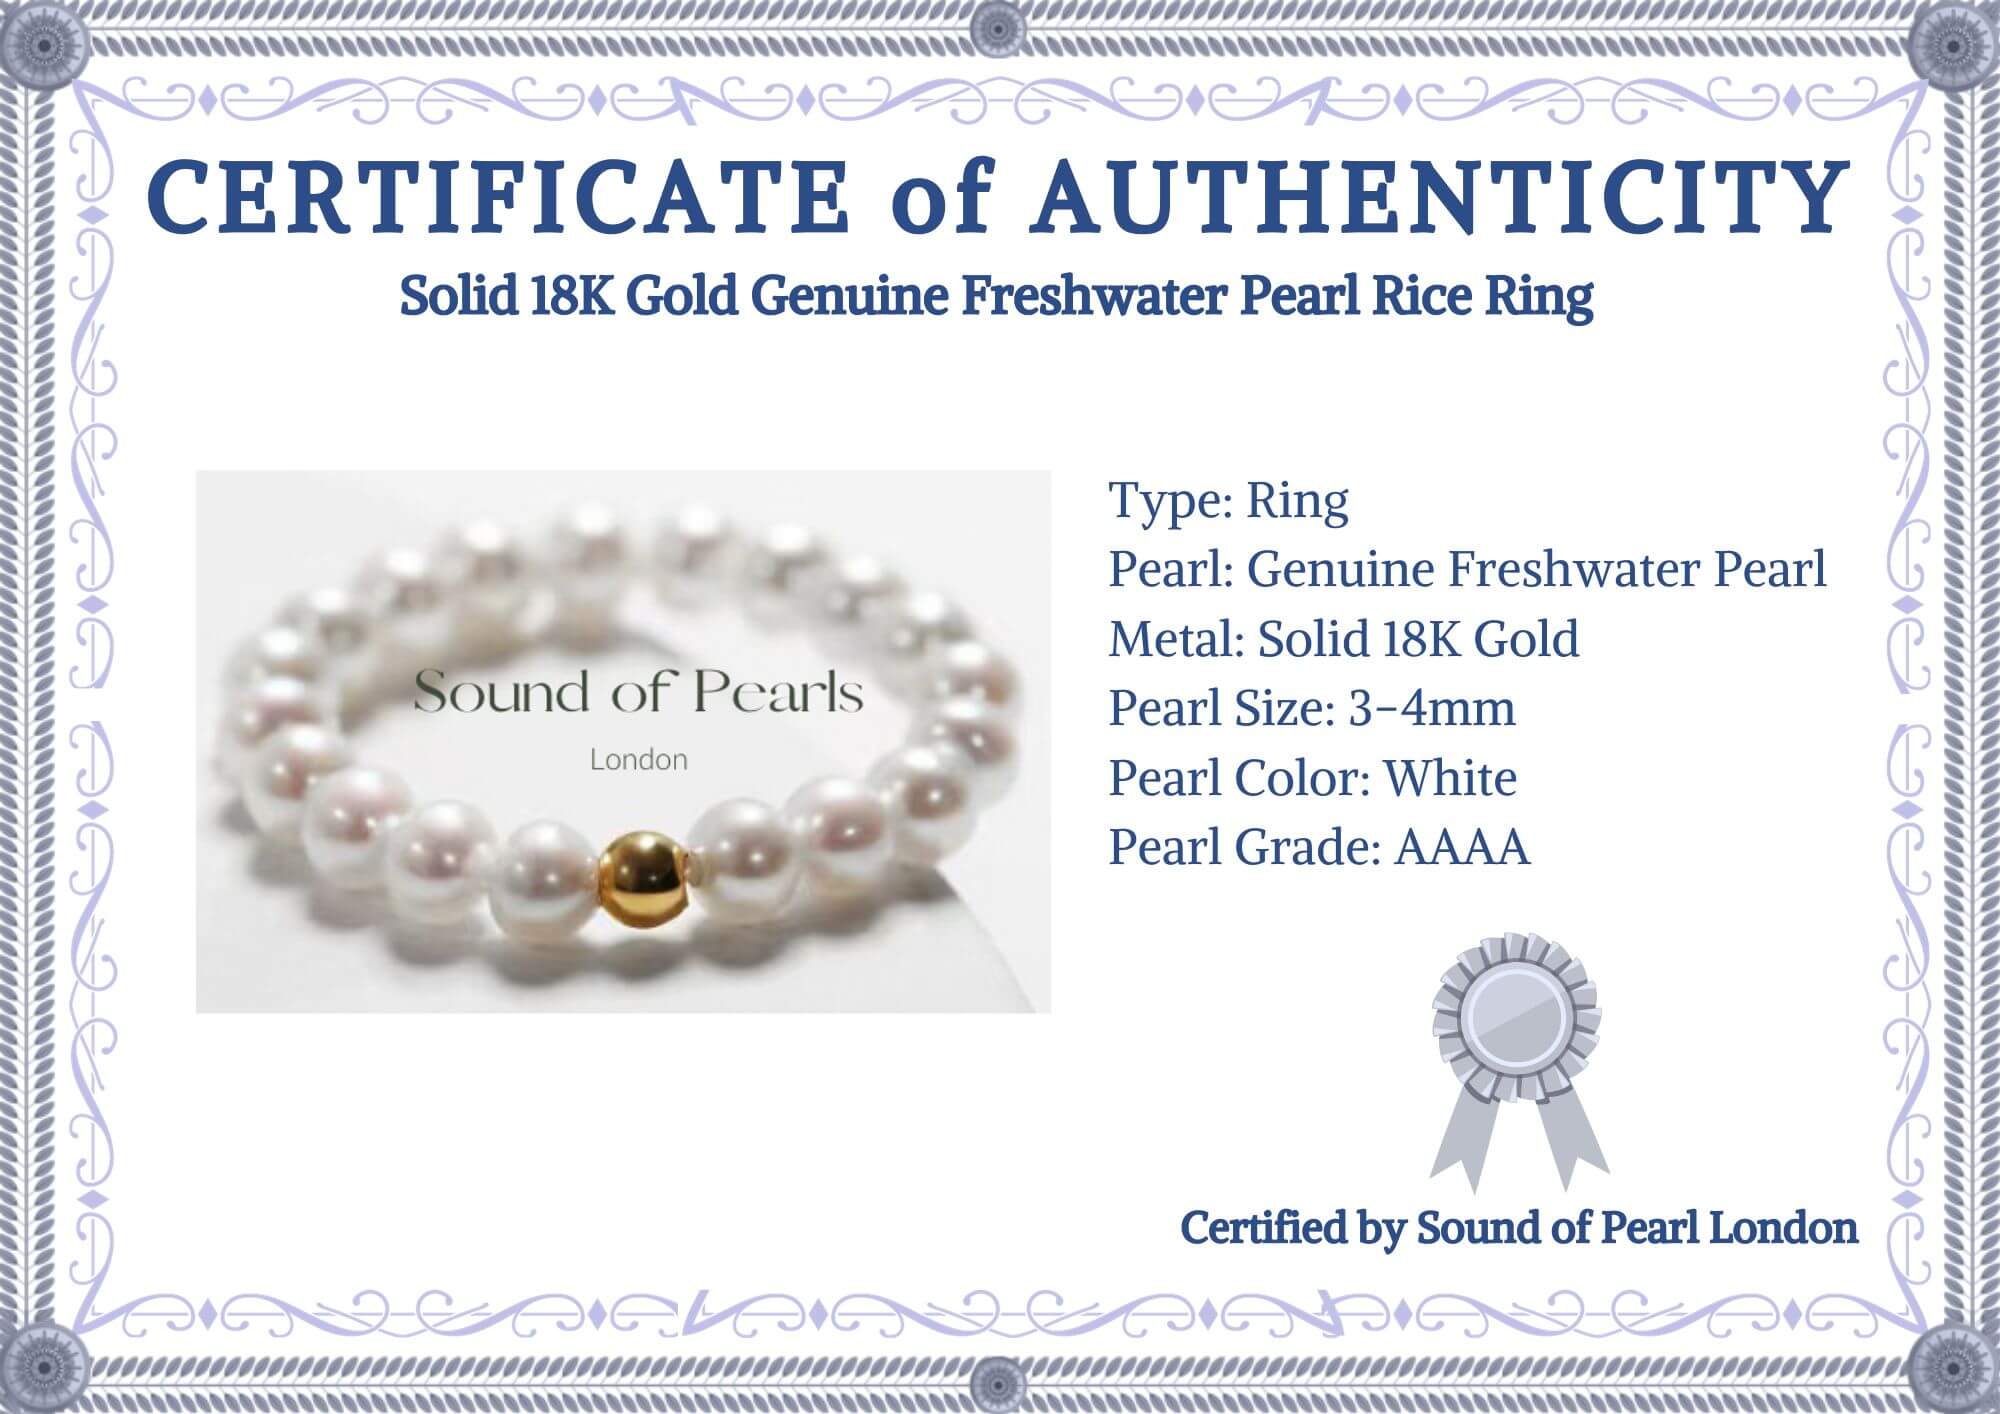 Solid 18K Gold Genuine Freshwater Pearl Rice Ring